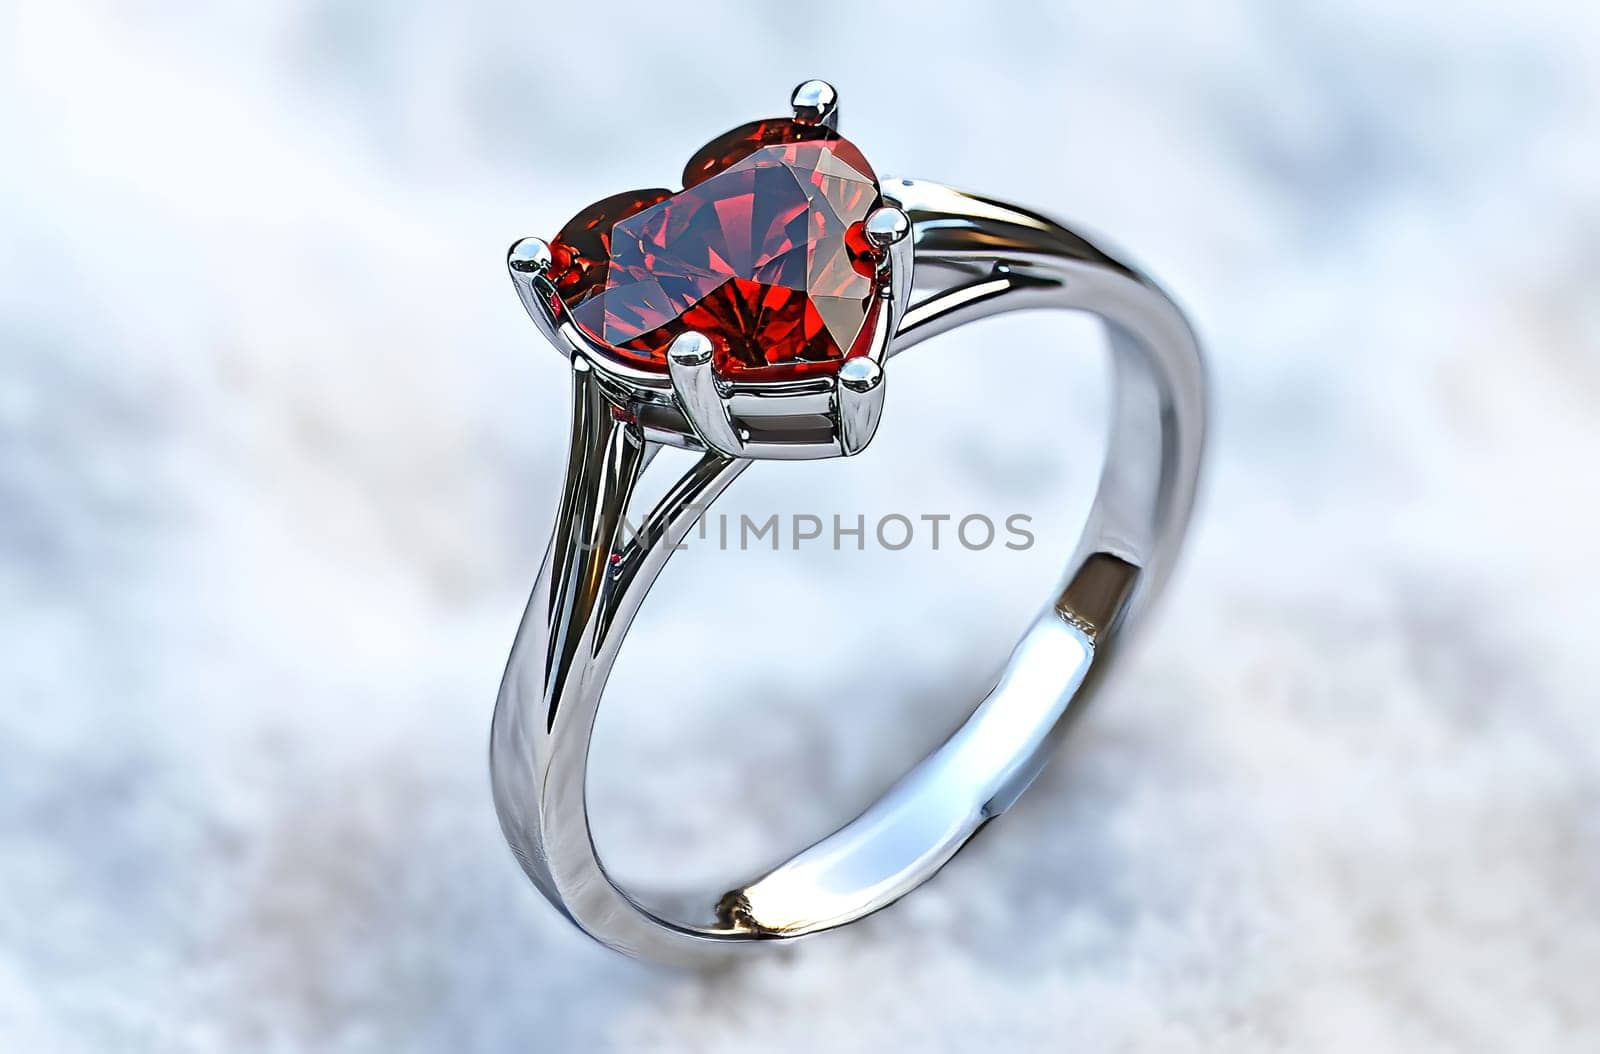 A red heart shaped ring resting on a plain white surface